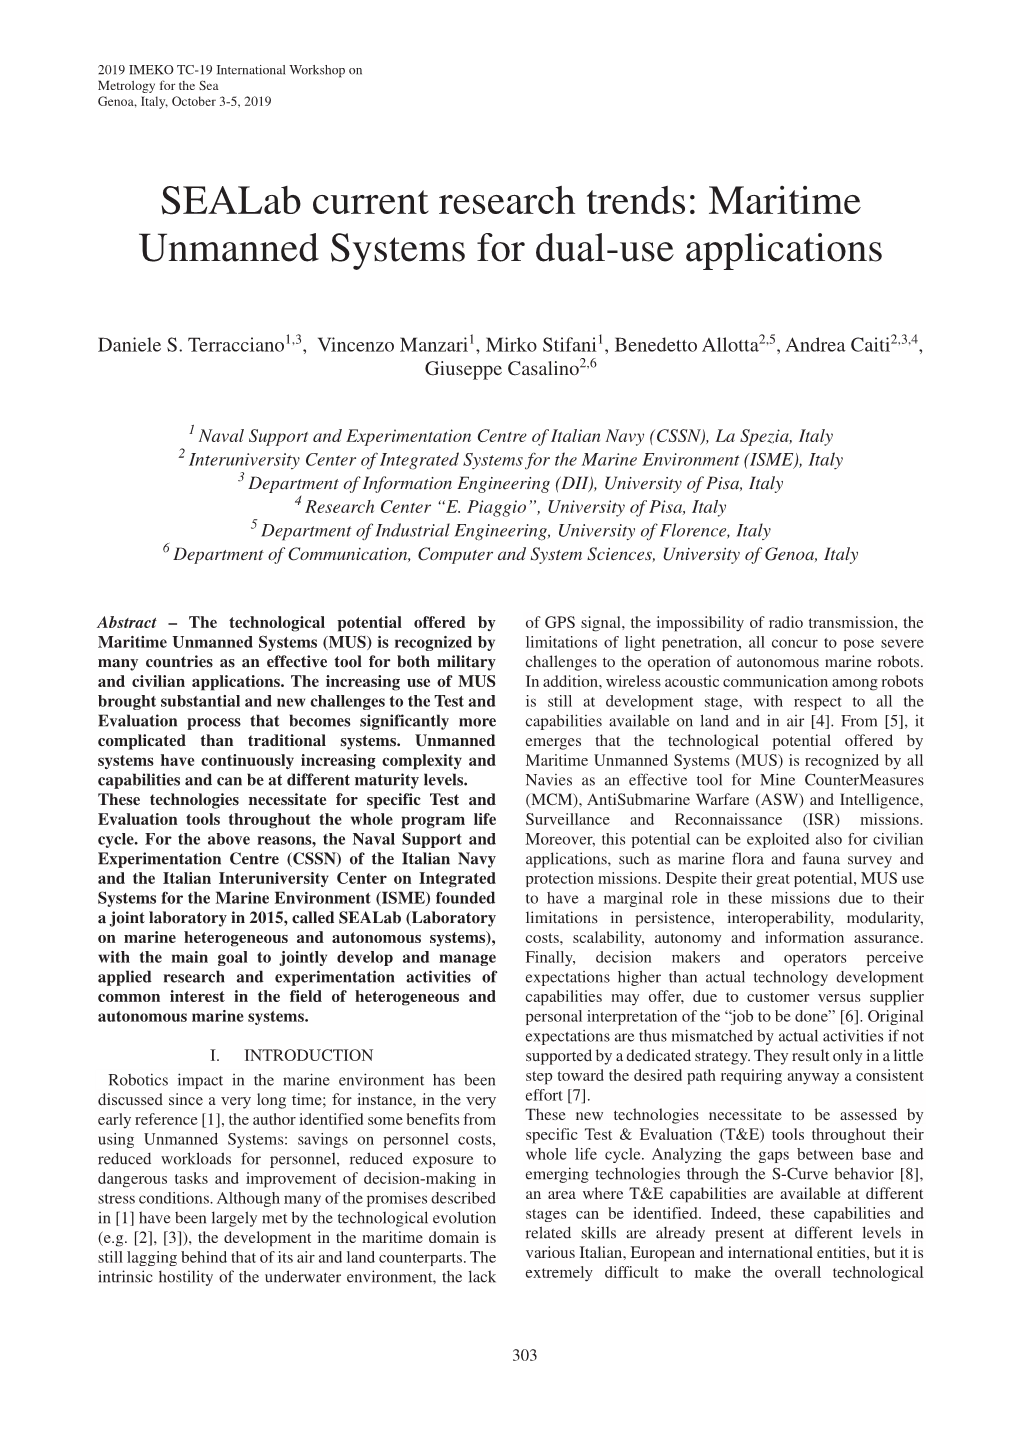 Sealab Current Research Trends: Maritime Unmanned Systems for Dual-Use Applications